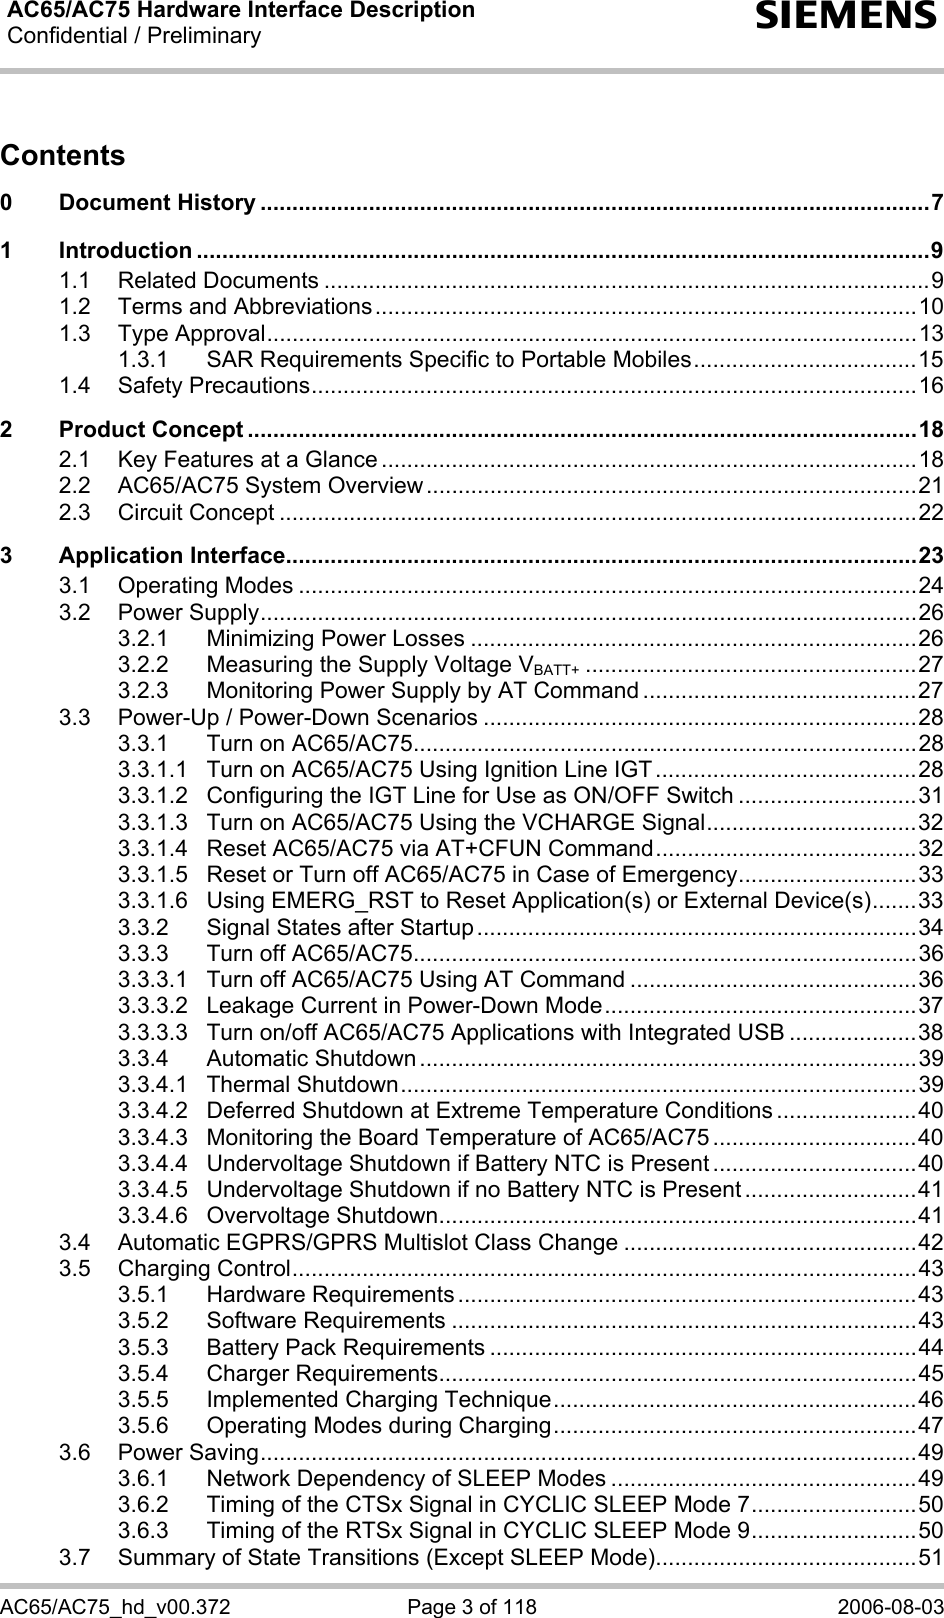 AC65/AC75 Hardware Interface Description Confidential / Preliminary  s AC65/AC75_hd_v00.372  Page 3 of 118  2006-08-03 Contents 0 Document History .........................................................................................................7 1 Introduction ...................................................................................................................9 1.1 Related Documents ...............................................................................................9 1.2 Terms and Abbreviations.....................................................................................10 1.3 Type Approval......................................................................................................13 1.3.1 SAR Requirements Specific to Portable Mobiles...................................15 1.4 Safety Precautions...............................................................................................16 2 Product Concept .........................................................................................................18 2.1 Key Features at a Glance ....................................................................................18 2.2 AC65/AC75 System Overview.............................................................................21 2.3 Circuit Concept ....................................................................................................22 3 Application Interface...................................................................................................23 3.1 Operating Modes .................................................................................................24 3.2 Power Supply.......................................................................................................26 3.2.1 Minimizing Power Losses ......................................................................26 3.2.2 Measuring the Supply Voltage VBATT+ ....................................................27 3.2.3 Monitoring Power Supply by AT Command ...........................................27 3.3 Power-Up / Power-Down Scenarios ....................................................................28 3.3.1 Turn on AC65/AC75...............................................................................28 3.3.1.1 Turn on AC65/AC75 Using Ignition Line IGT .........................................28 3.3.1.2 Configuring the IGT Line for Use as ON/OFF Switch ............................31 3.3.1.3 Turn on AC65/AC75 Using the VCHARGE Signal.................................32 3.3.1.4 Reset AC65/AC75 via AT+CFUN Command.........................................32 3.3.1.5 Reset or Turn off AC65/AC75 in Case of Emergency............................33 3.3.1.6 Using EMERG_RST to Reset Application(s) or External Device(s).......33 3.3.2 Signal States after Startup.....................................................................34 3.3.3 Turn off AC65/AC75...............................................................................36 3.3.3.1 Turn off AC65/AC75 Using AT Command .............................................36 3.3.3.2 Leakage Current in Power-Down Mode.................................................37 3.3.3.3 Turn on/off AC65/AC75 Applications with Integrated USB ....................38 3.3.4 Automatic Shutdown ..............................................................................39 3.3.4.1 Thermal Shutdown.................................................................................39 3.3.4.2 Deferred Shutdown at Extreme Temperature Conditions ......................40 3.3.4.3 Monitoring the Board Temperature of AC65/AC75 ................................40 3.3.4.4 Undervoltage Shutdown if Battery NTC is Present ................................40 3.3.4.5 Undervoltage Shutdown if no Battery NTC is Present ...........................41 3.3.4.6 Overvoltage Shutdown...........................................................................41 3.4 Automatic EGPRS/GPRS Multislot Class Change ..............................................42 3.5 Charging Control..................................................................................................43 3.5.1 Hardware Requirements ........................................................................43 3.5.2 Software Requirements .........................................................................43 3.5.3 Battery Pack Requirements ...................................................................44 3.5.4 Charger Requirements...........................................................................45 3.5.5 Implemented Charging Technique.........................................................46 3.5.6 Operating Modes during Charging.........................................................47 3.6 Power Saving.......................................................................................................49 3.6.1 Network Dependency of SLEEP Modes ................................................49 3.6.2 Timing of the CTSx Signal in CYCLIC SLEEP Mode 7..........................50 3.6.3 Timing of the RTSx Signal in CYCLIC SLEEP Mode 9..........................50 3.7 Summary of State Transitions (Except SLEEP Mode).........................................51 